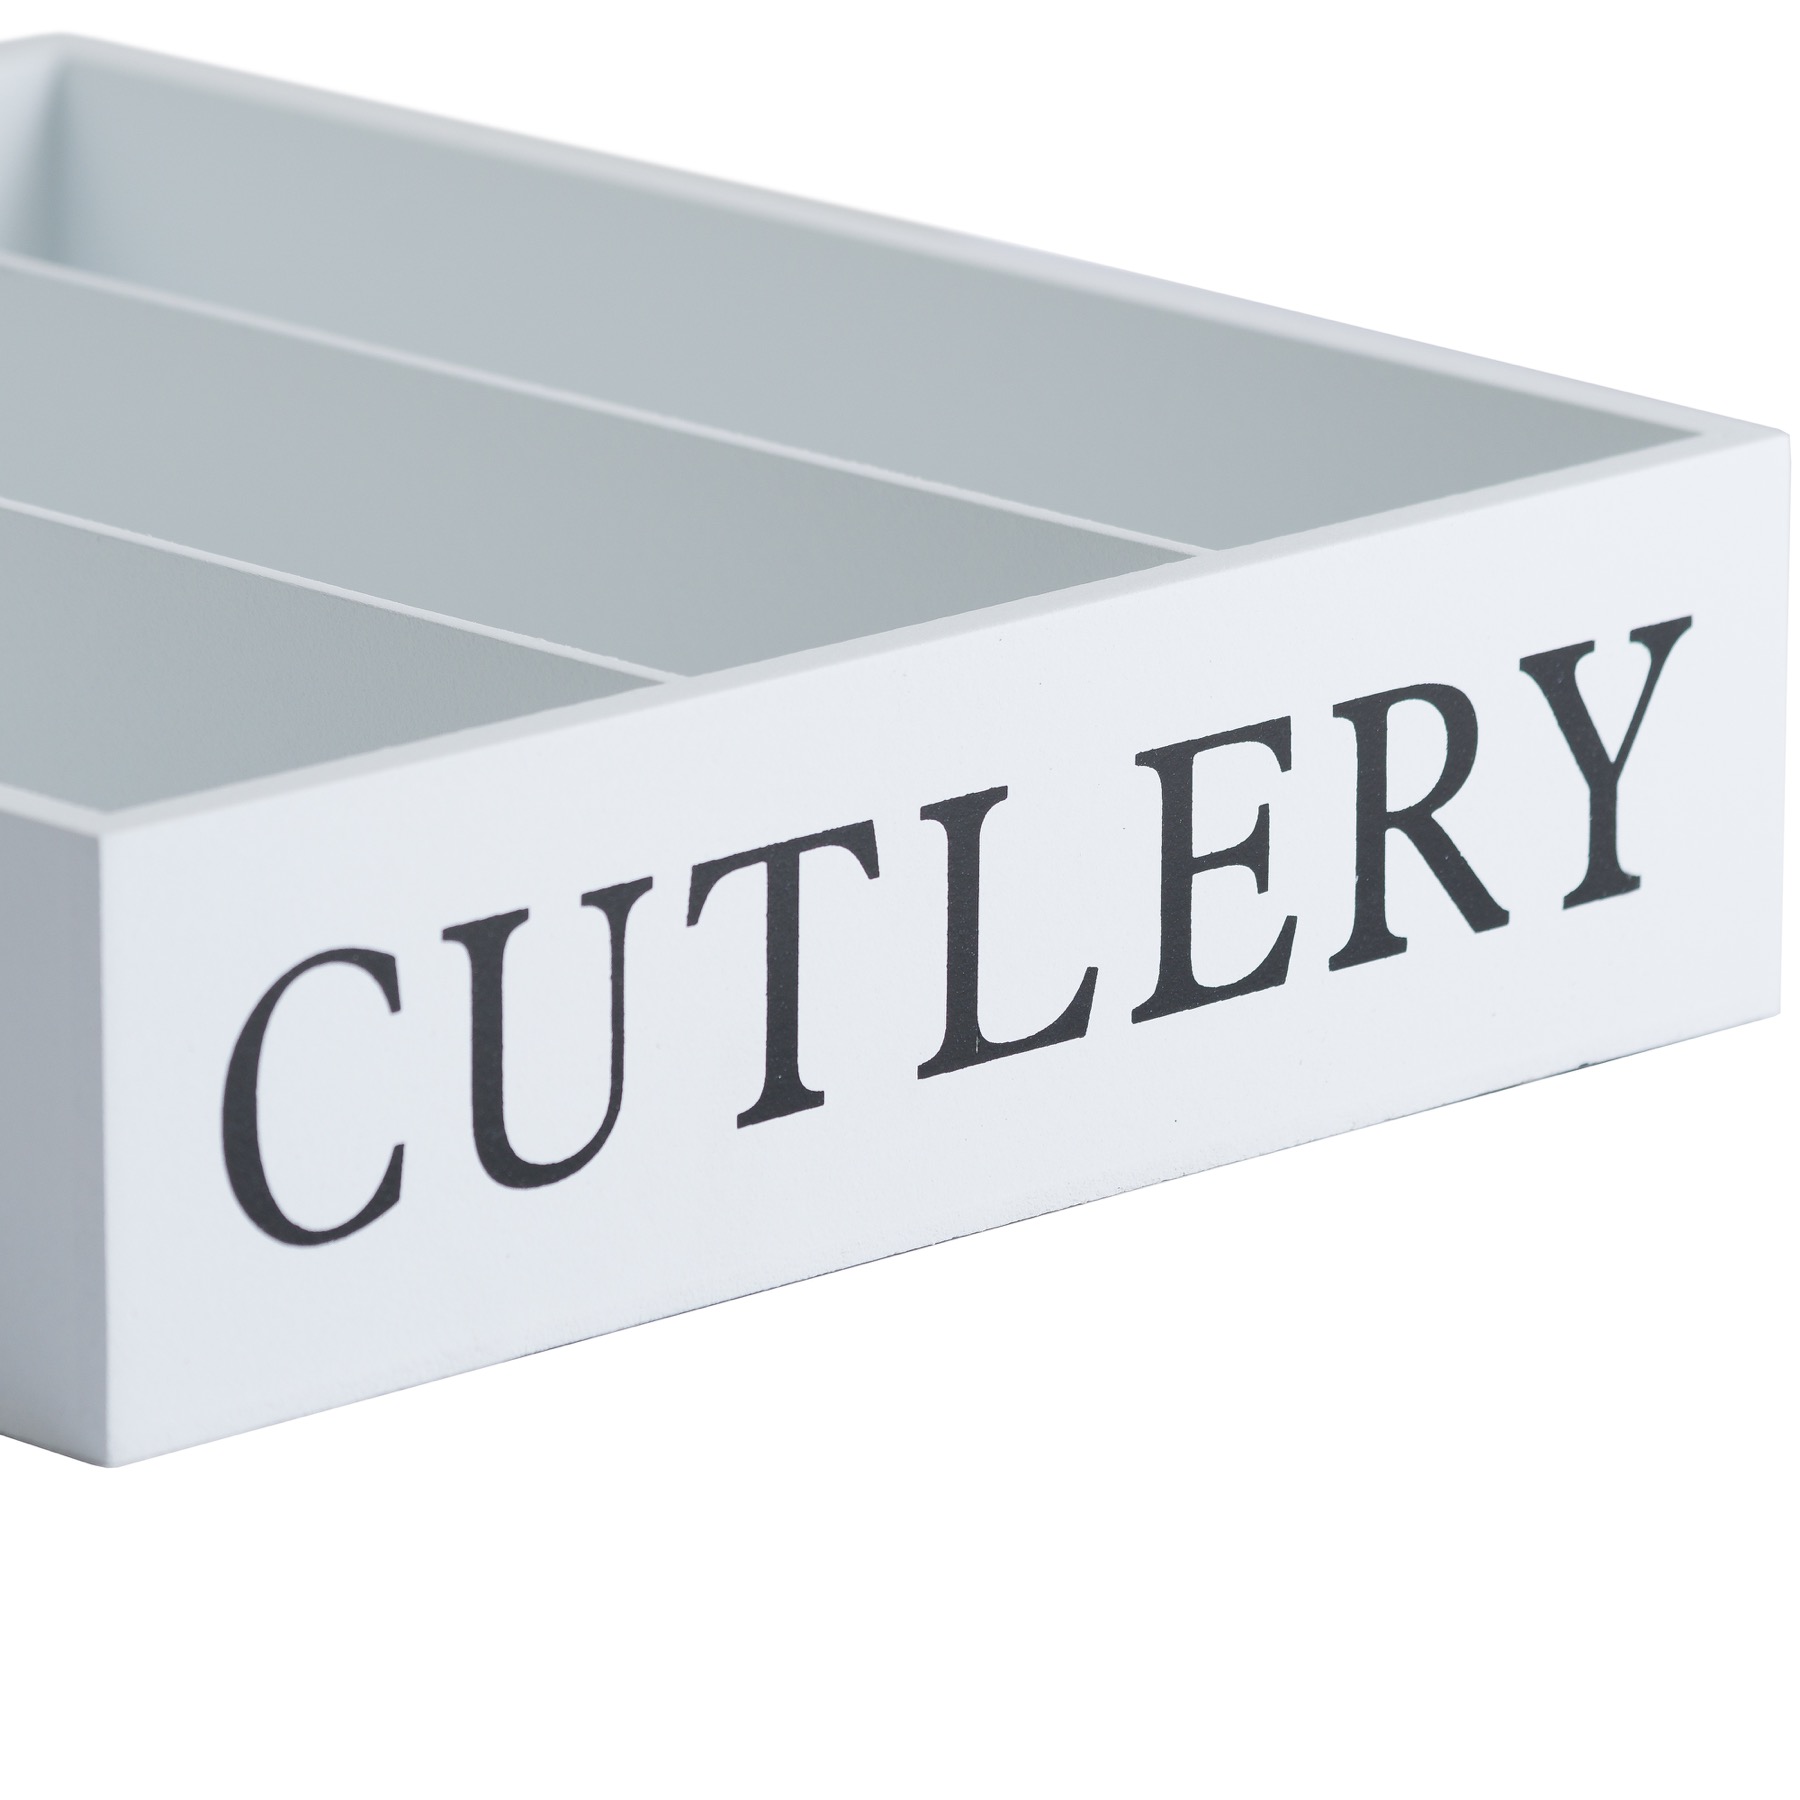 Country Cutlery Box - Image 3